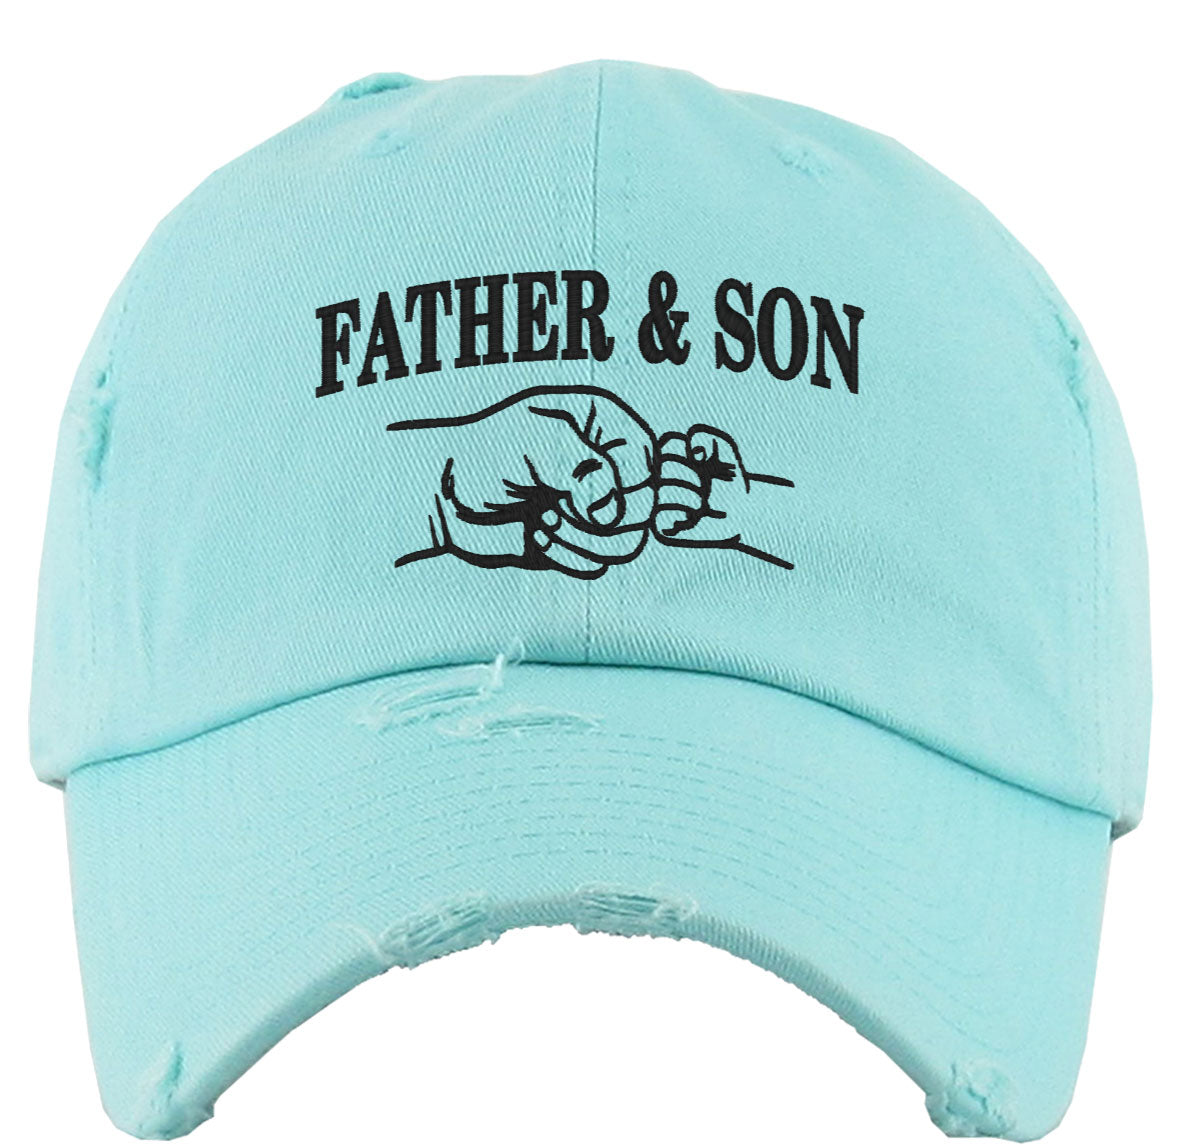 Father And Son Vintage Baseball Cap